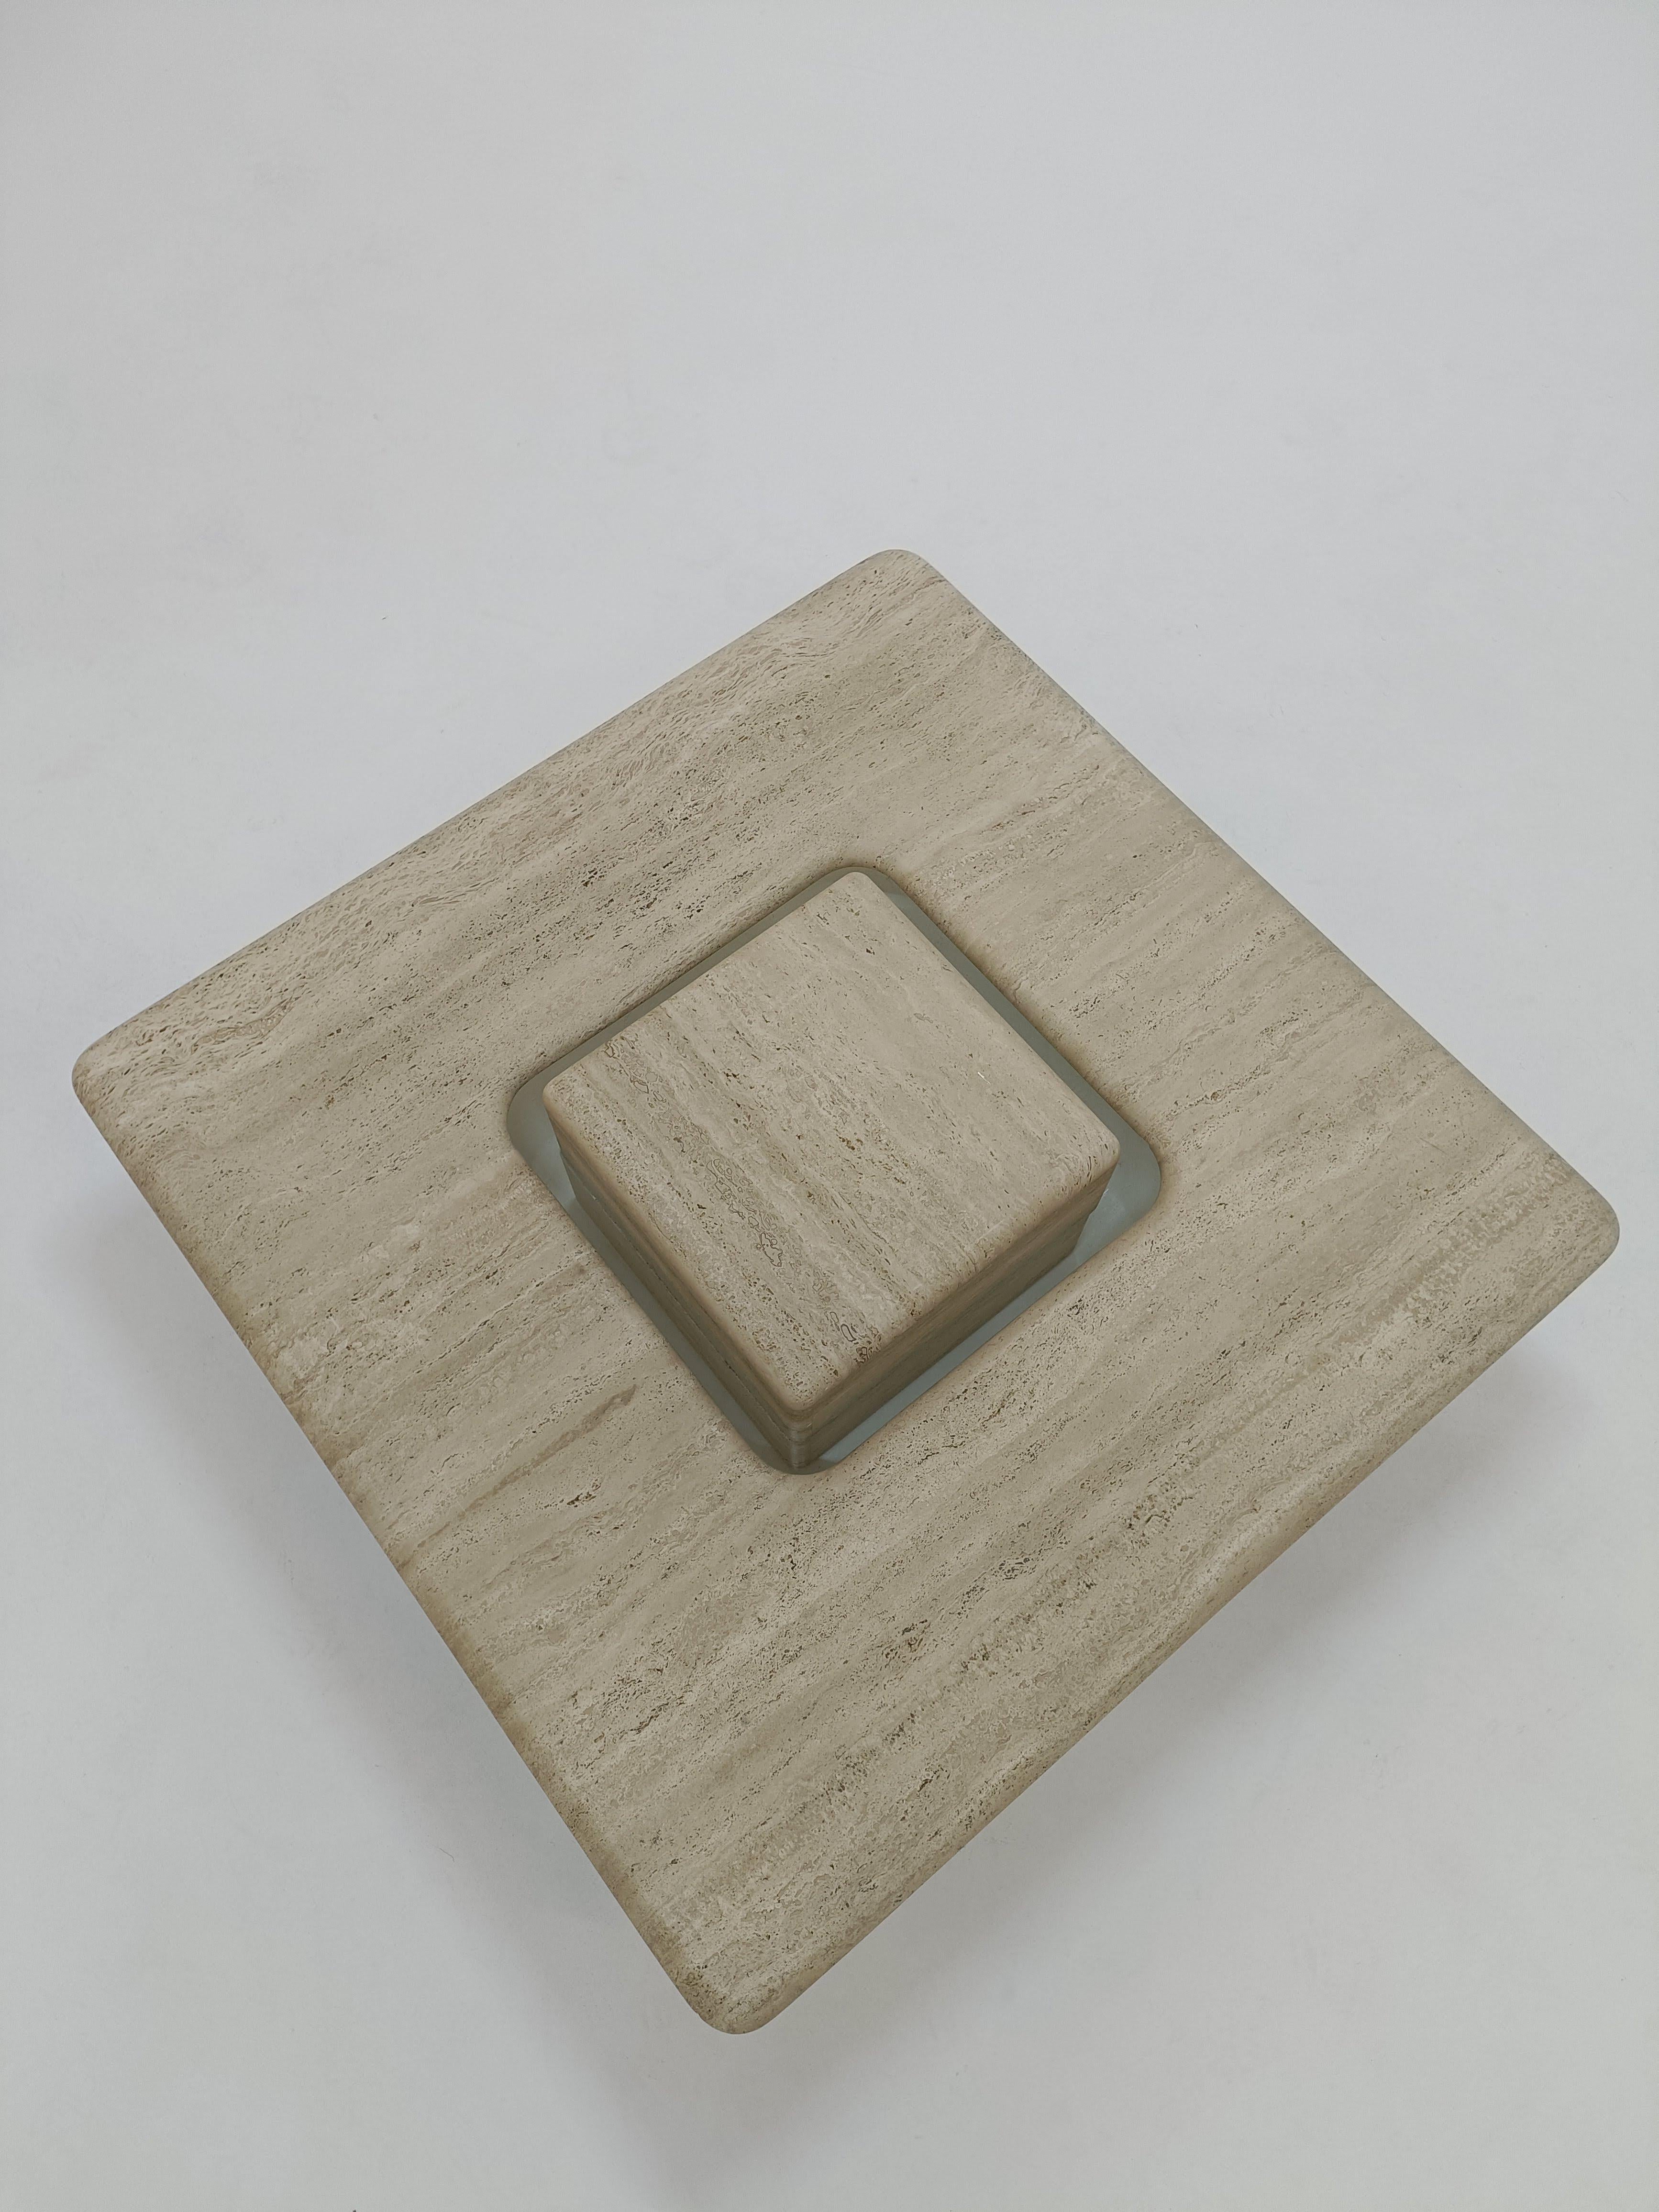 Beautiful Italian design square coffee table cream white travertine (no marble) with floating top from 1970.
.
End of the 70s. 
.
This is a spectacular piece that will go perfectly with a large modular sofa like the camaleonda, soriana or similar